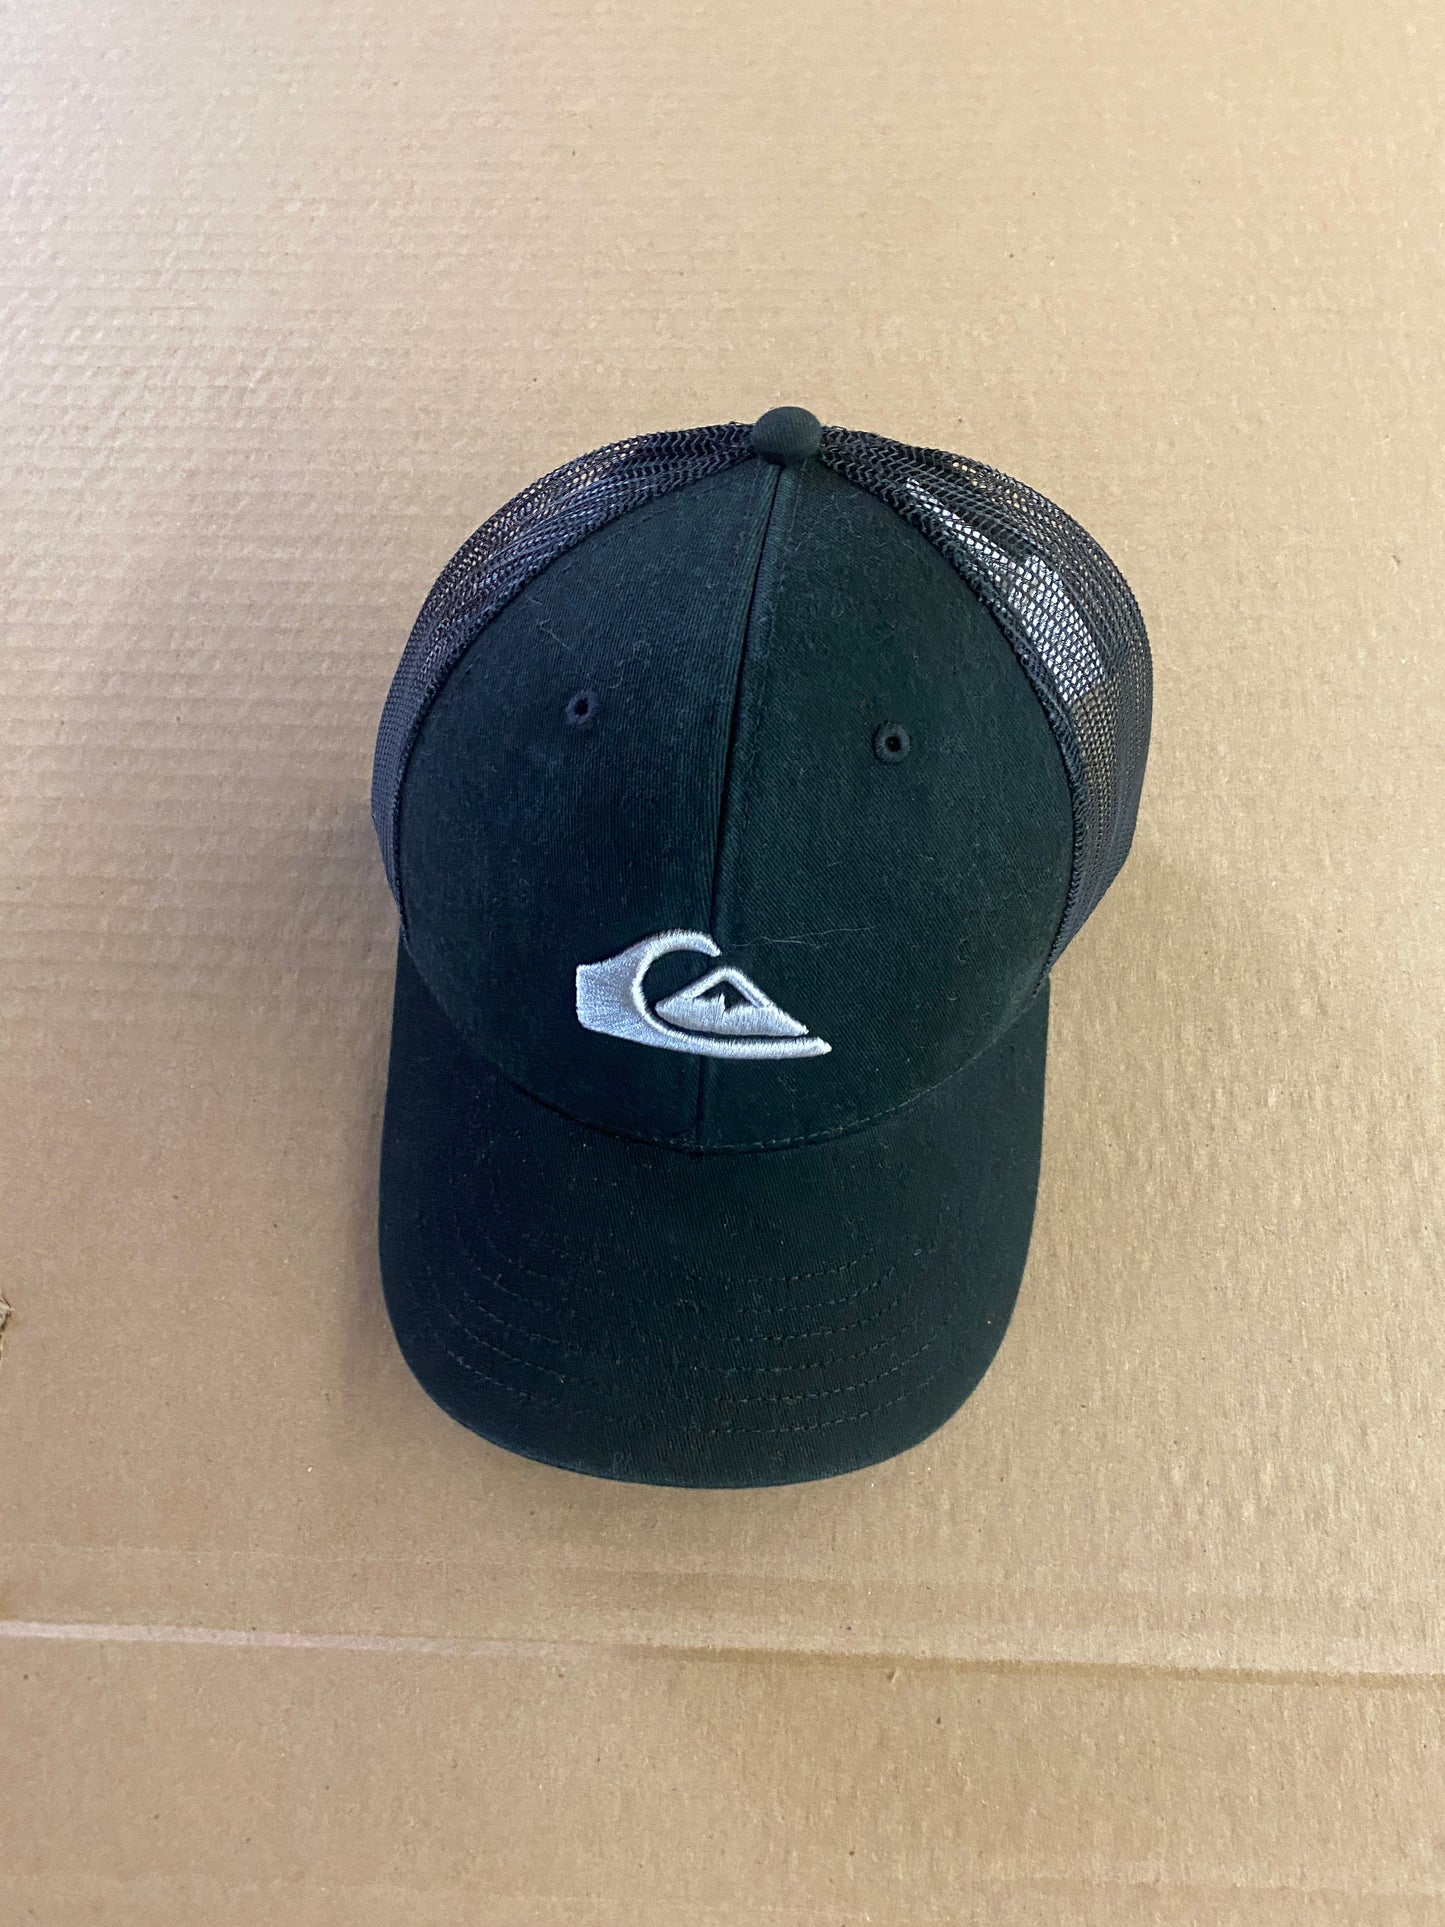 Dick's Sporting Goods | Assorted Hats & Beanies | NWT & NWOT | Small Box | 10 Piece Min.